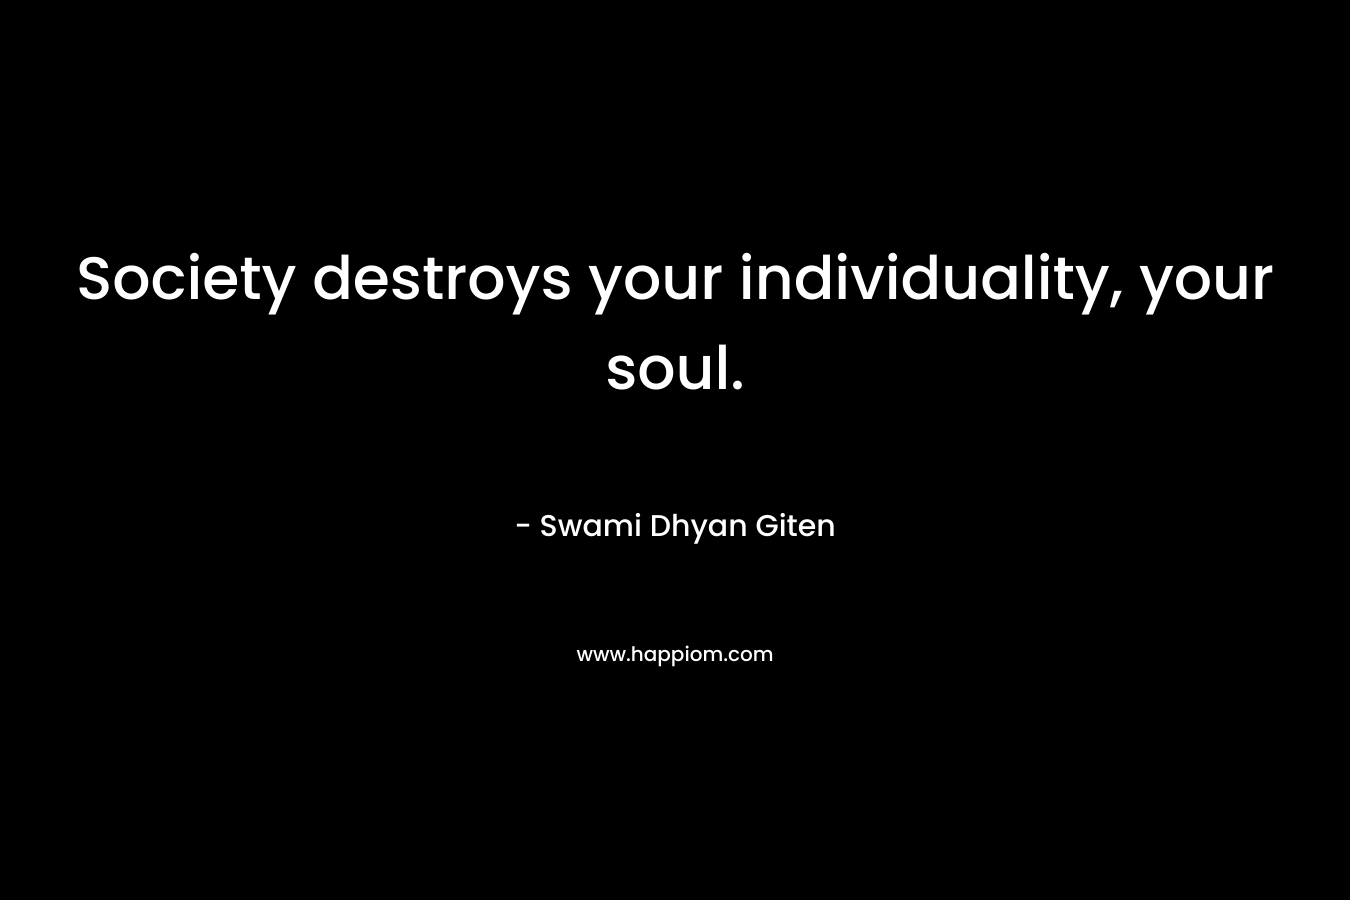 Society destroys your individuality, your soul.